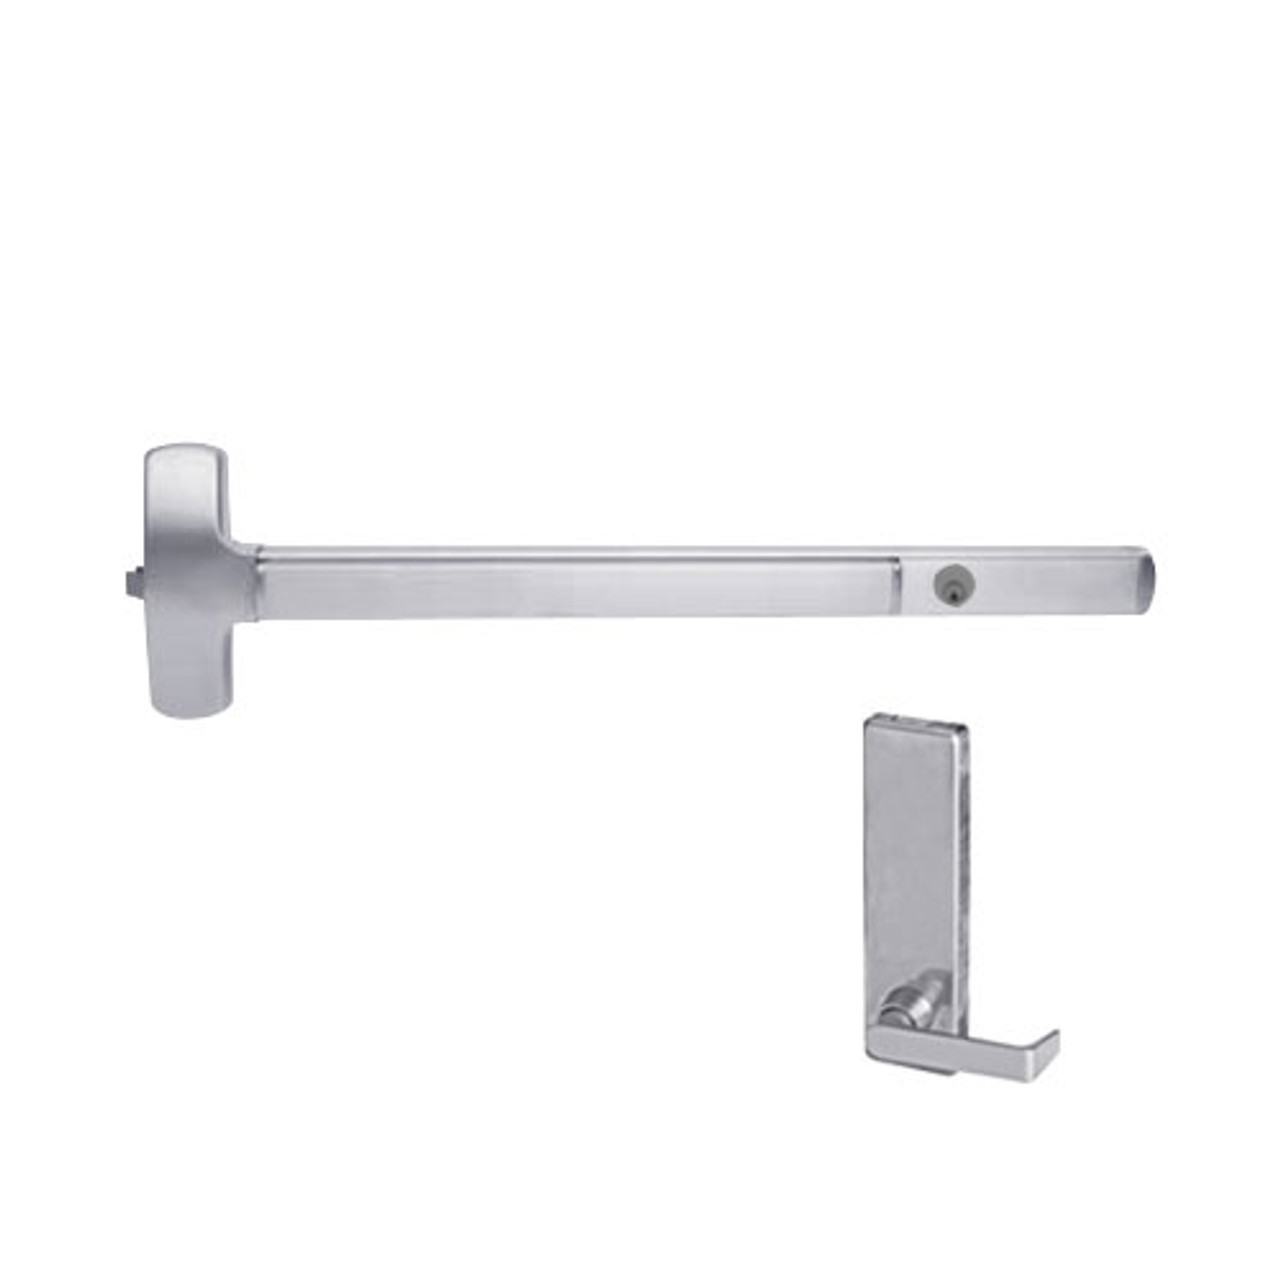 CD25-R-L-BE-DANE-US32-3-LHR Falcon Exit Device in Polished Stainless Steel